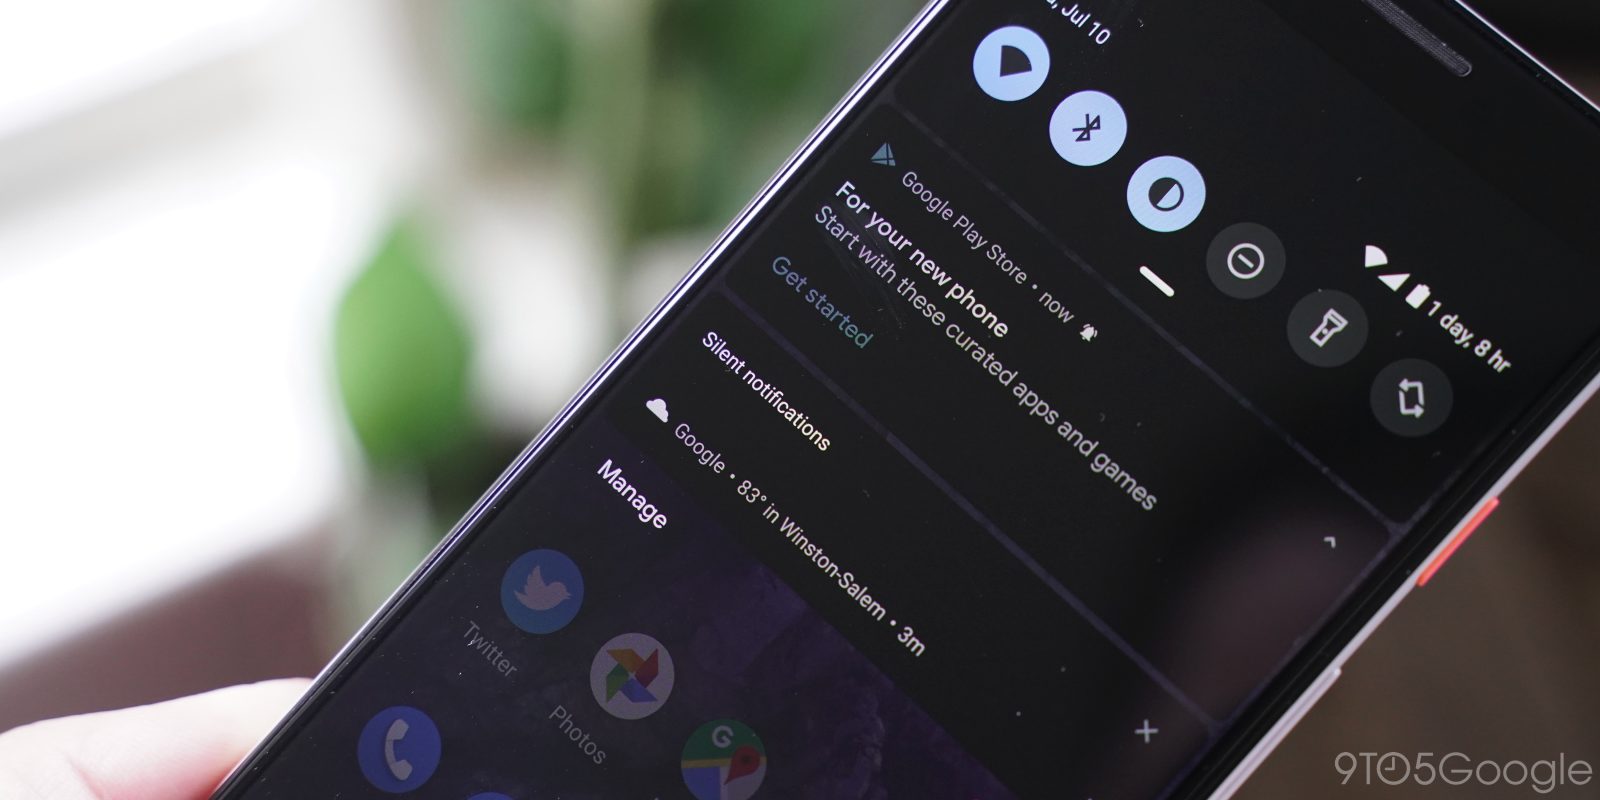 OnePlus releases Android Q Developer Preview 3 for OnePlus 6, 6T, 7 & 7 Pro